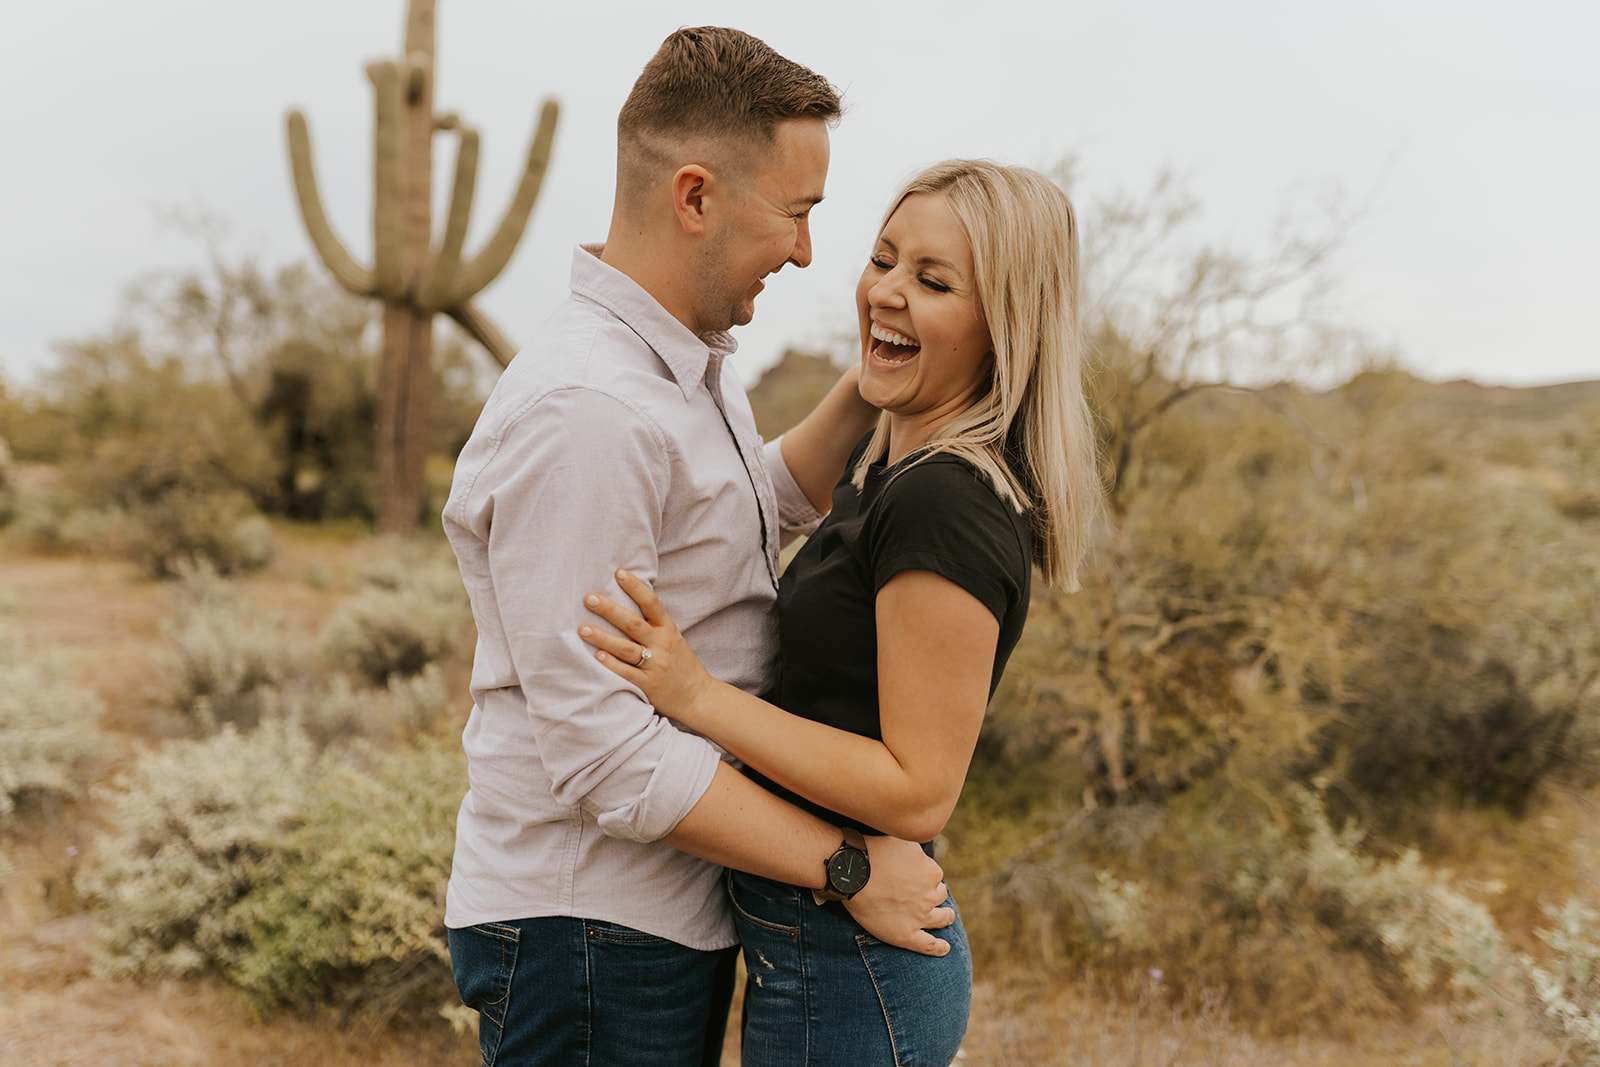 Laughing Couple in Desert Engagement Photo